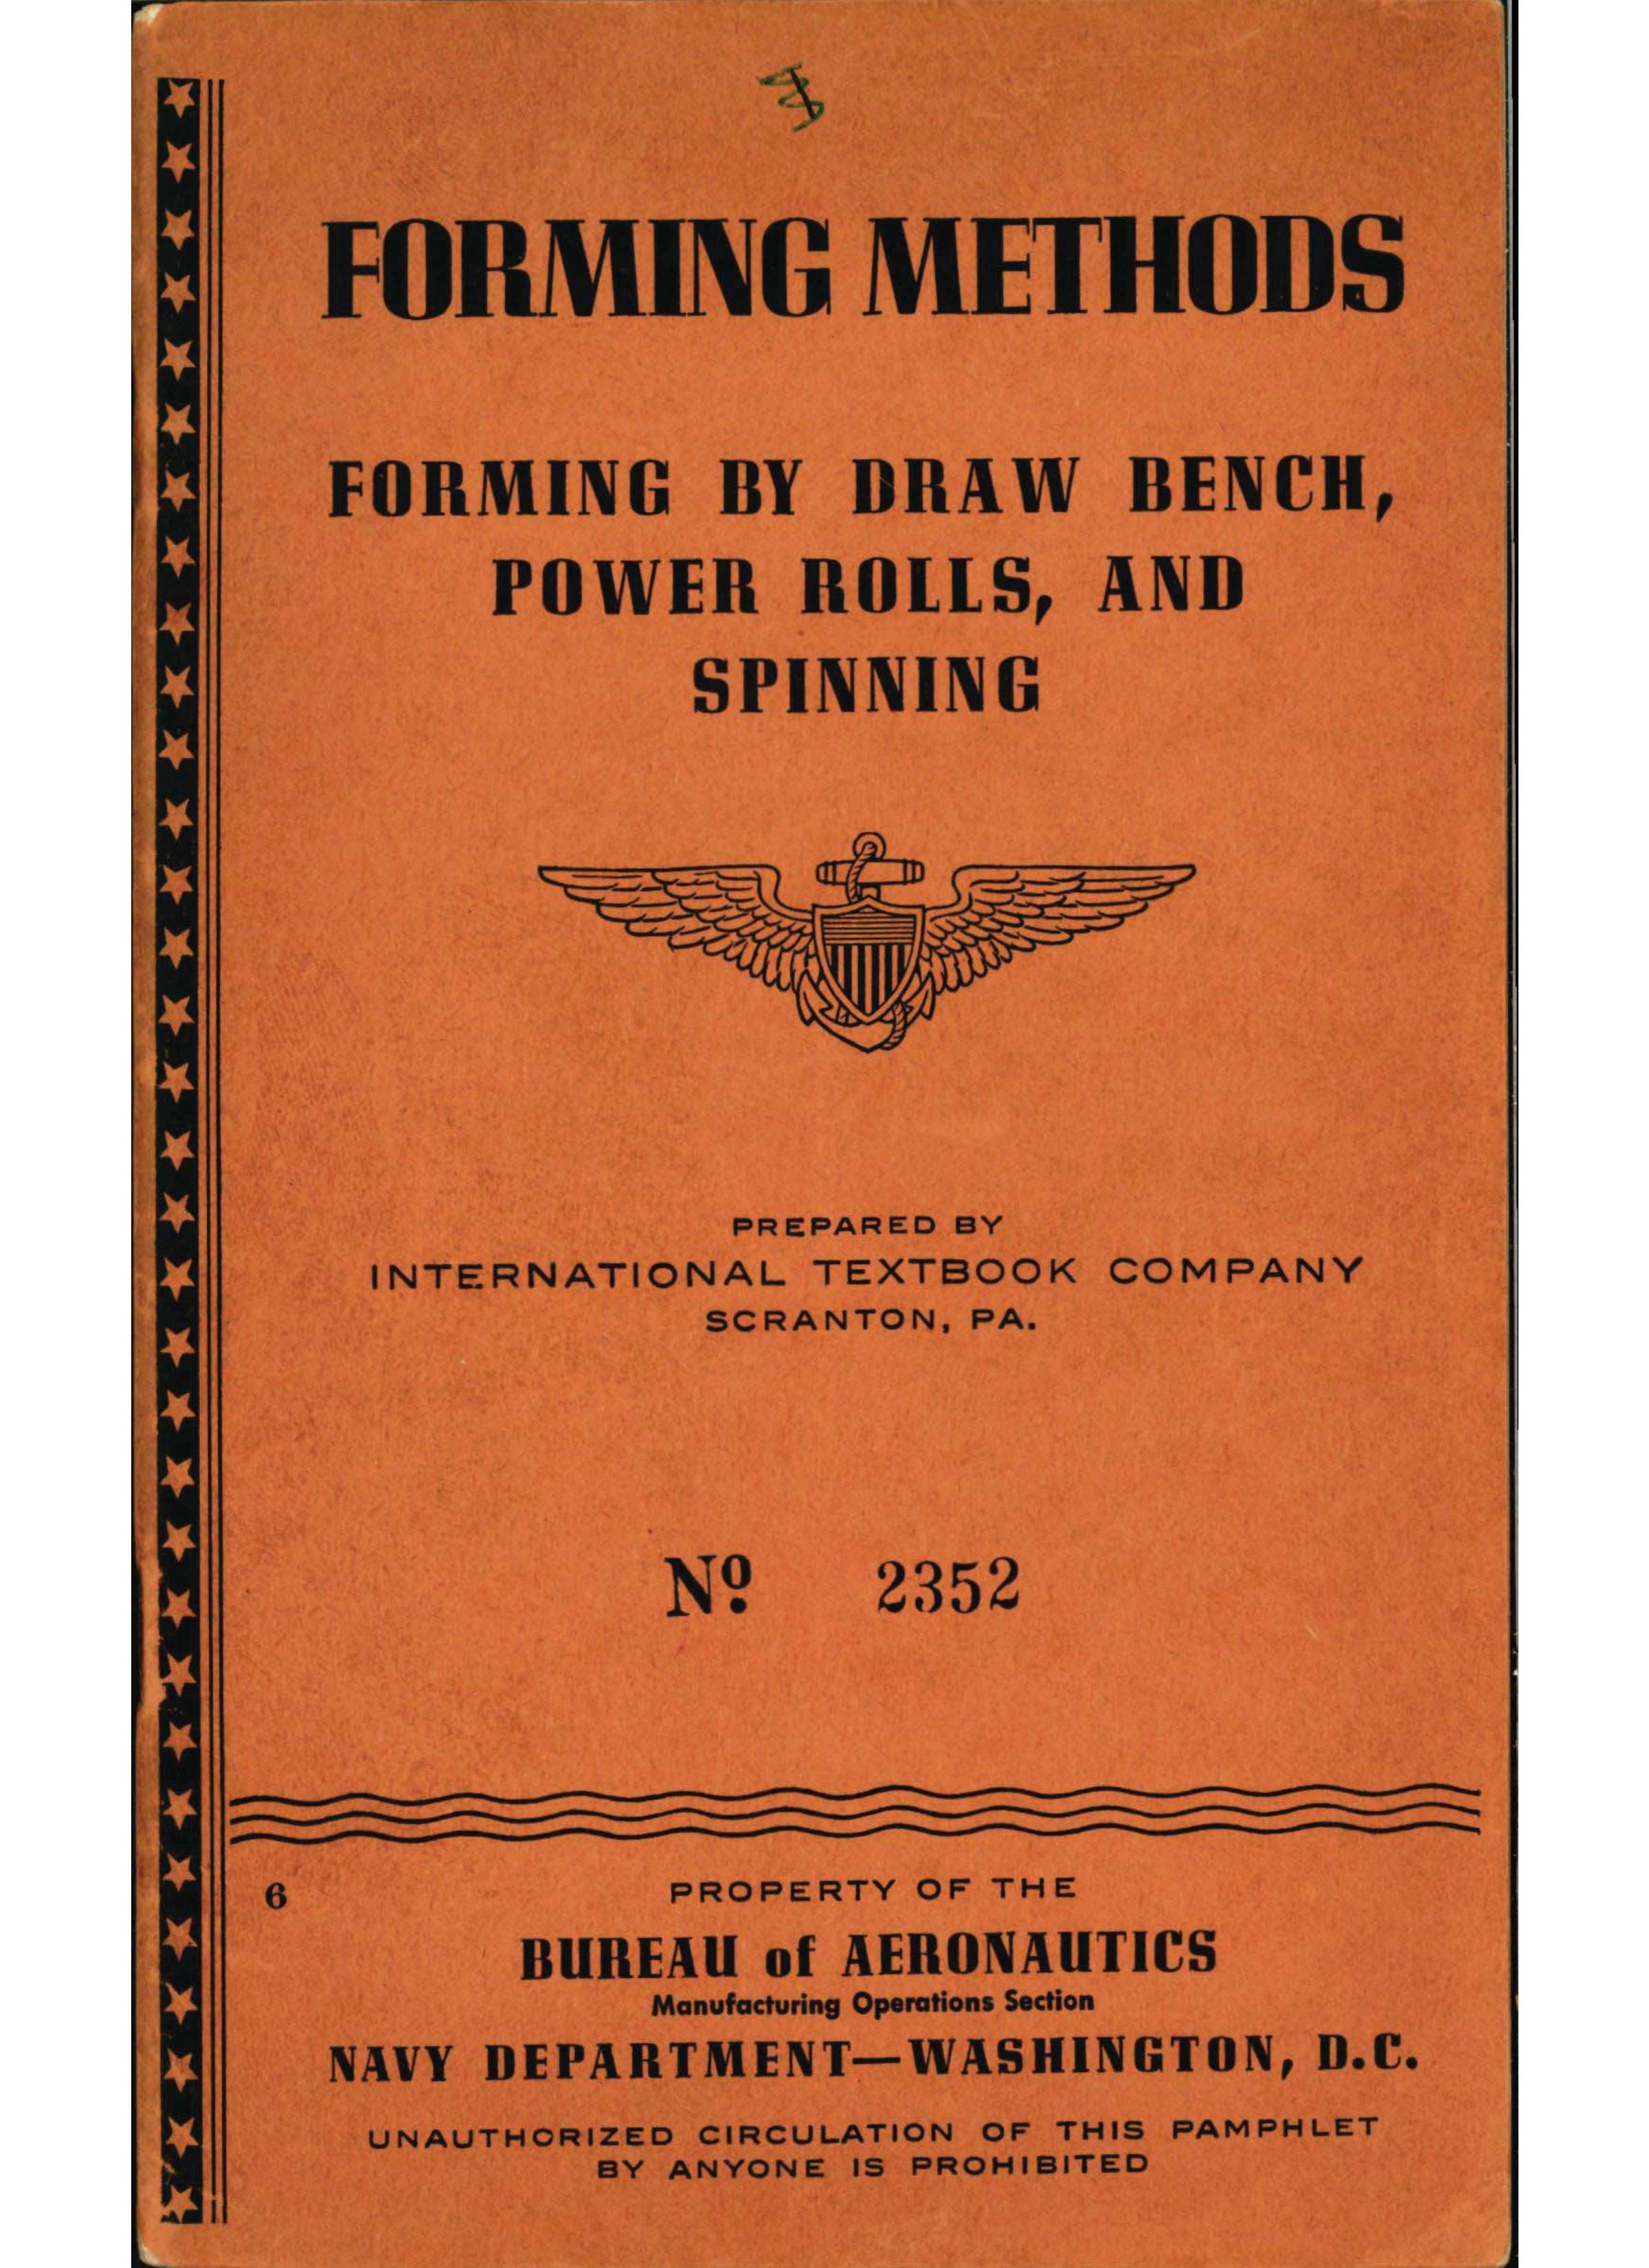 Sample page 1 from AirCorps Library document: Forming Methods - Draw Bench, Power Rolls, Spinning - Bureau of Aeronautics